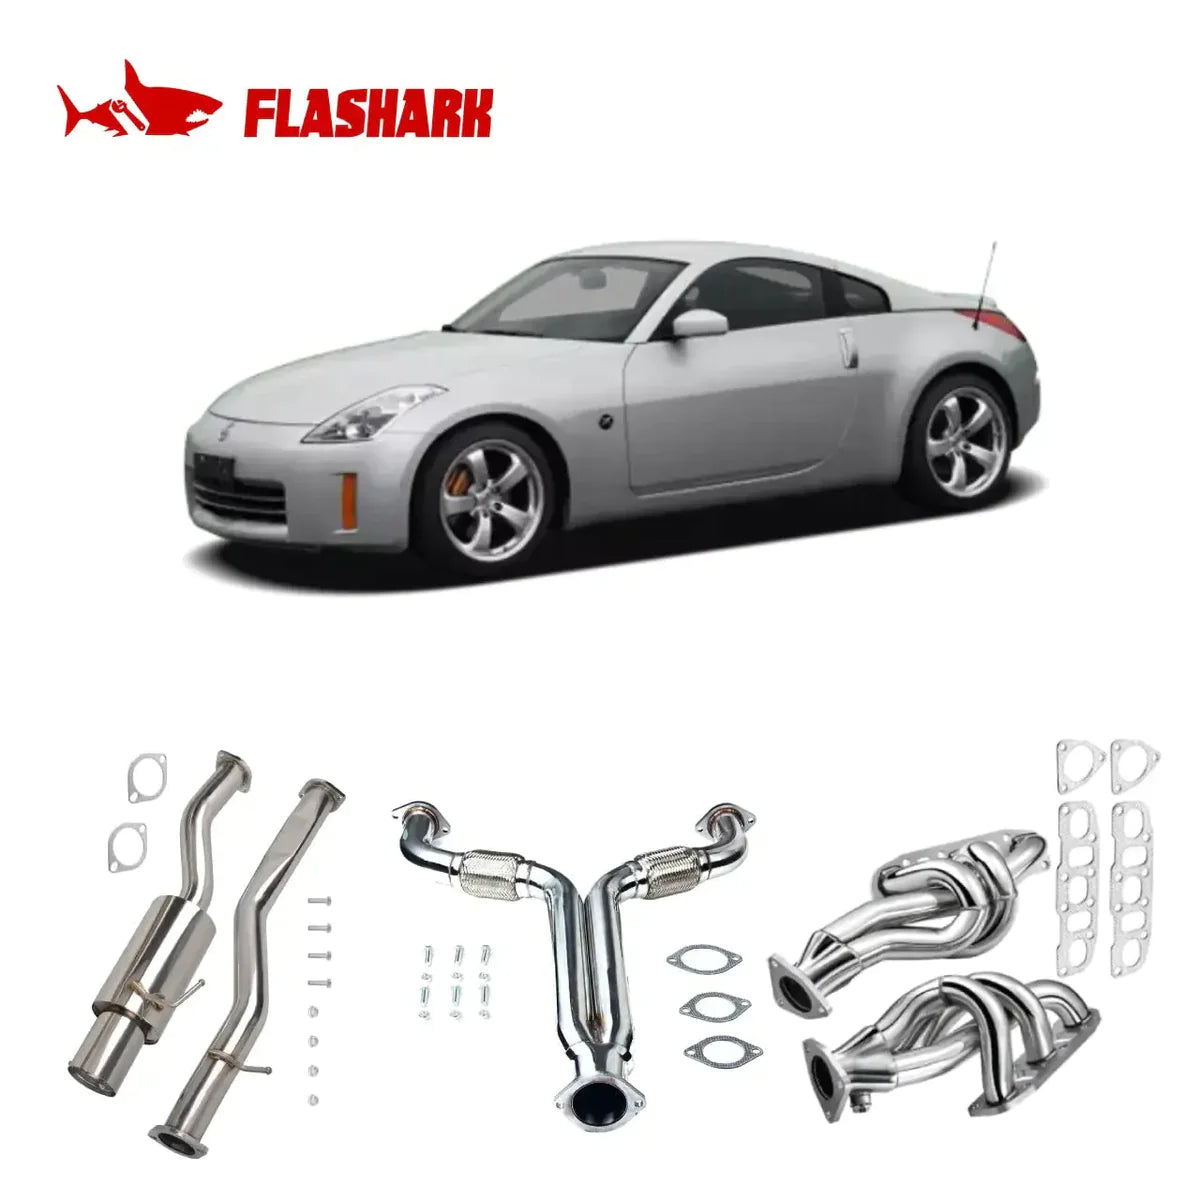 Exhaust Header/Catback/Downpipe Exhaust All-In-One Kit for 2003-2006 Nissan 350Z 3.5L 2005, 2007 Infiniti G35